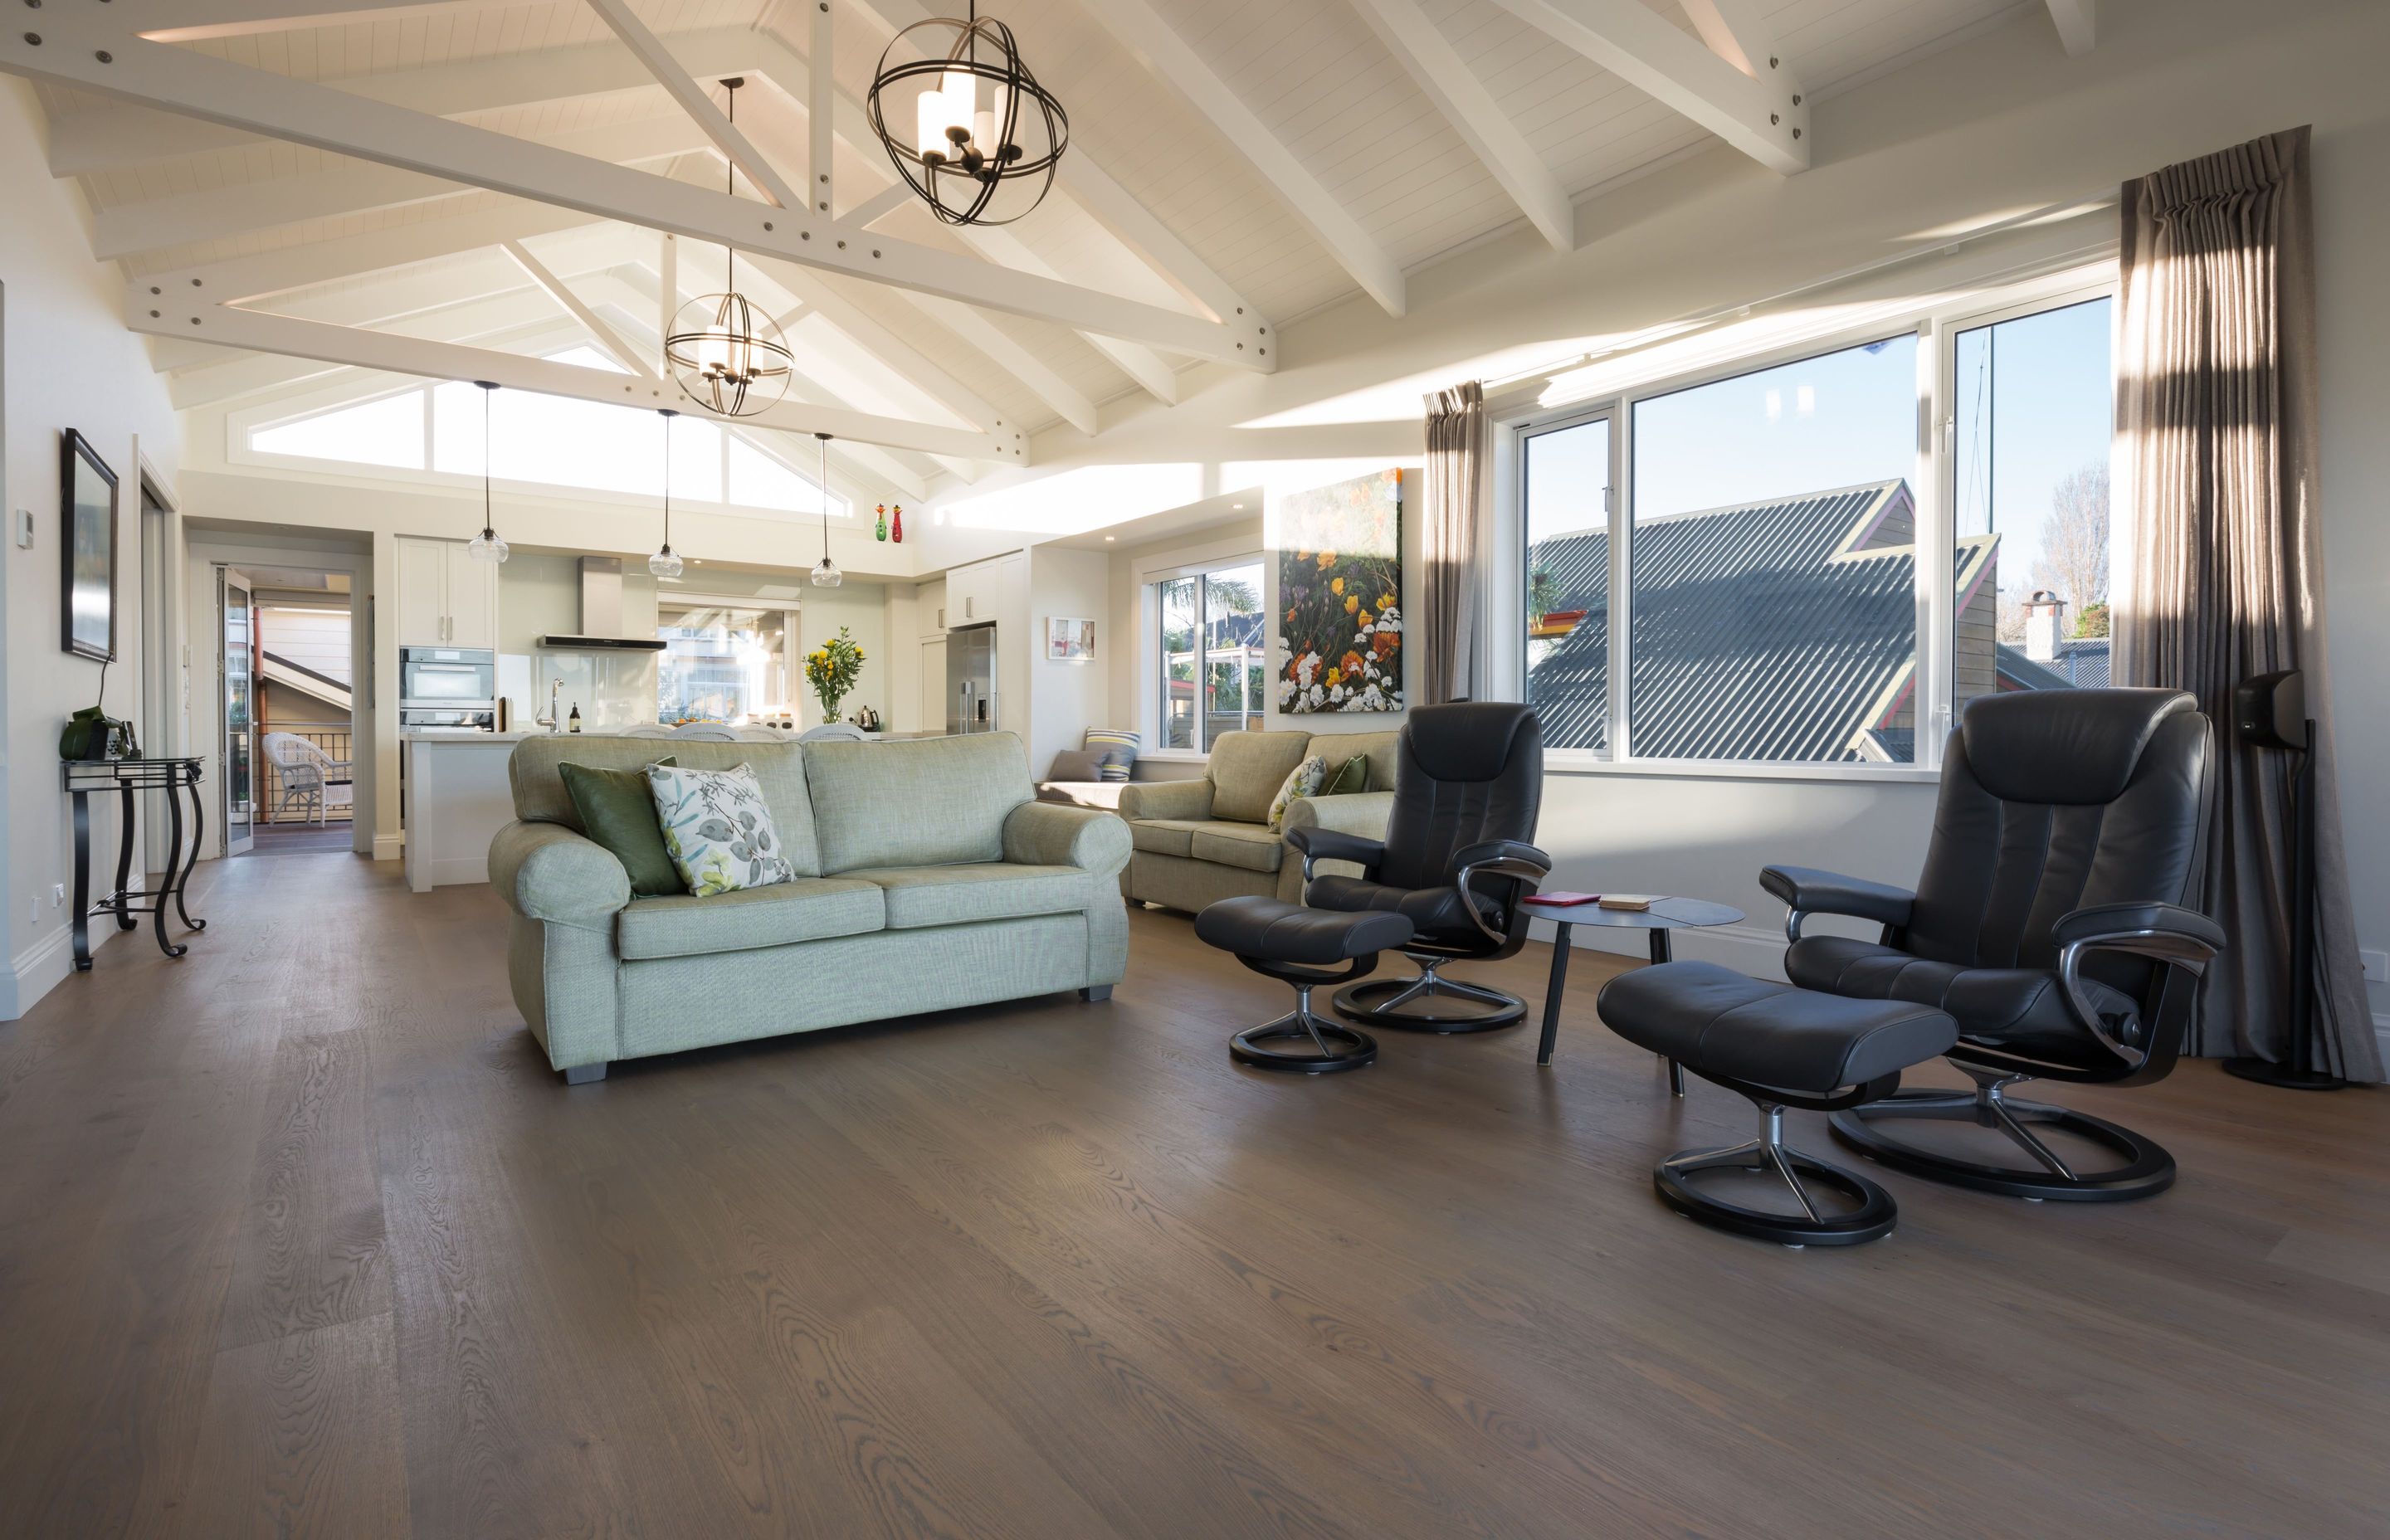 Engineered European Oak ​flooring and finished w/ Tover Oil in 'Smoke'